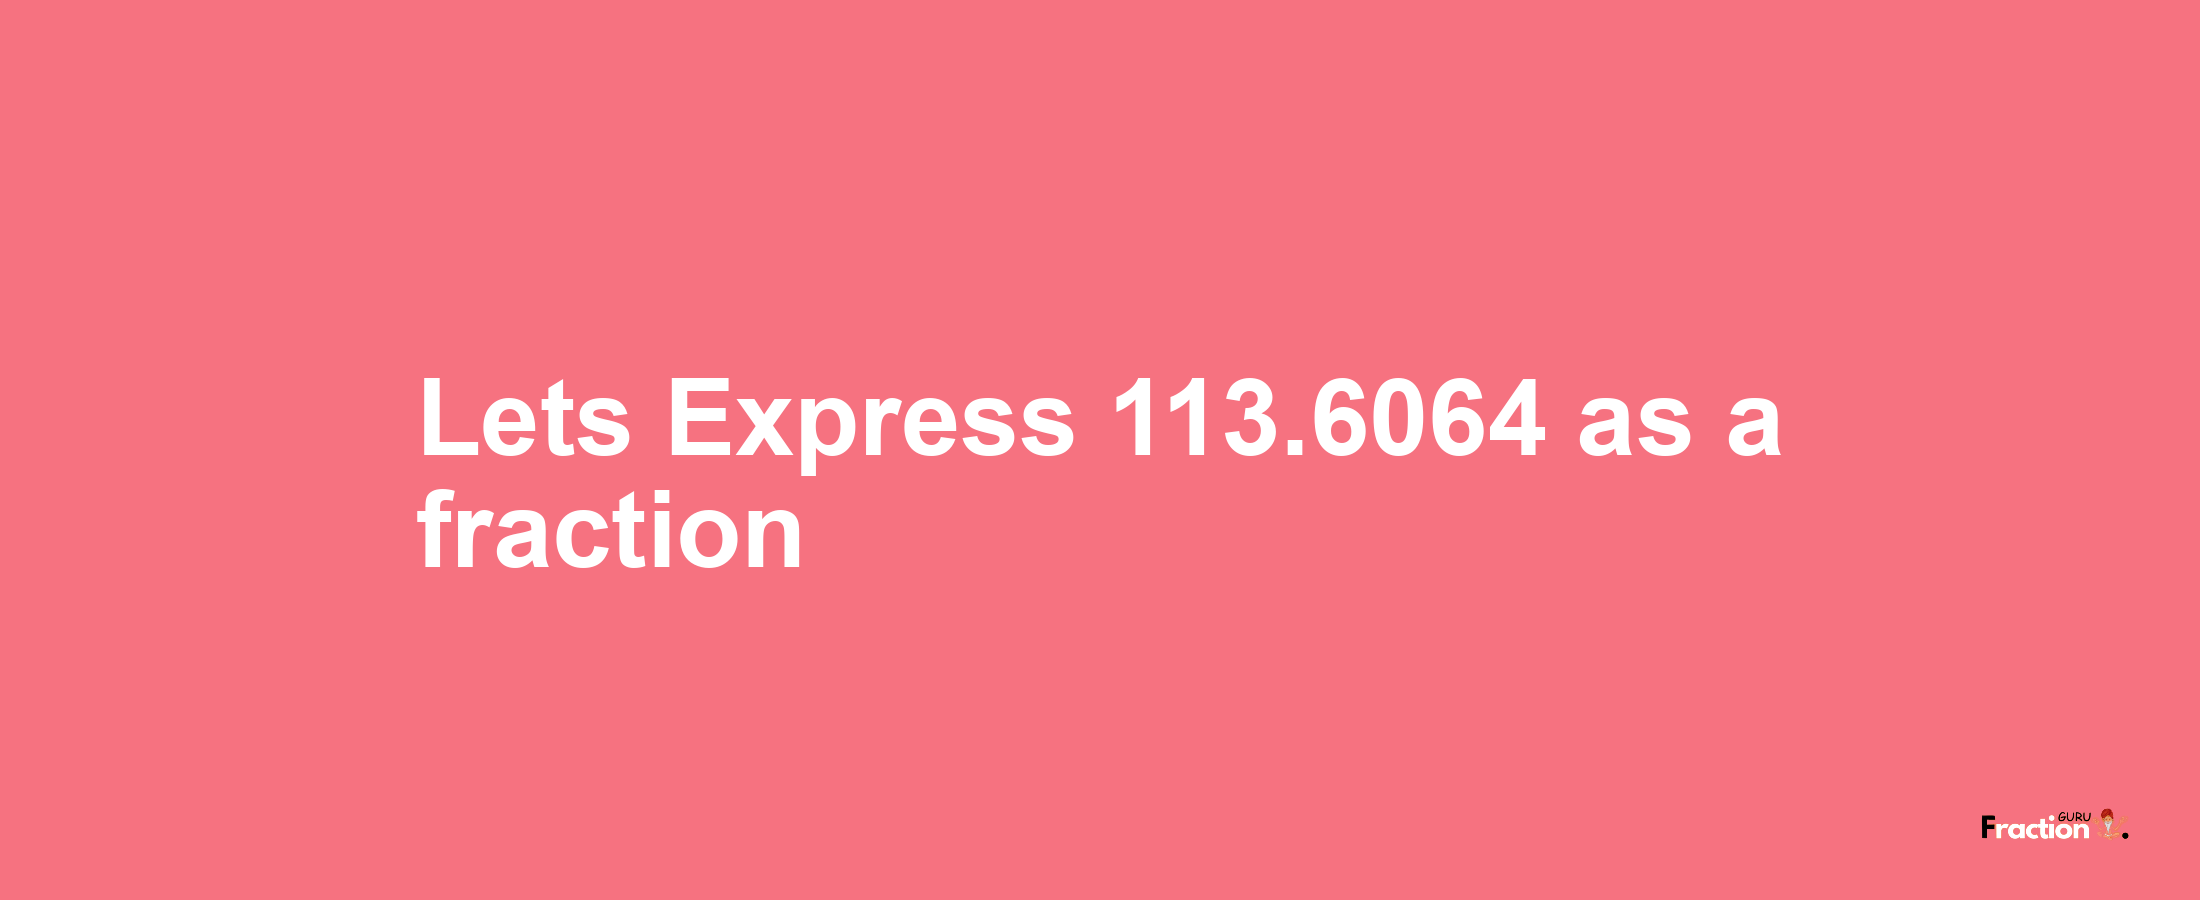 Lets Express 113.6064 as afraction